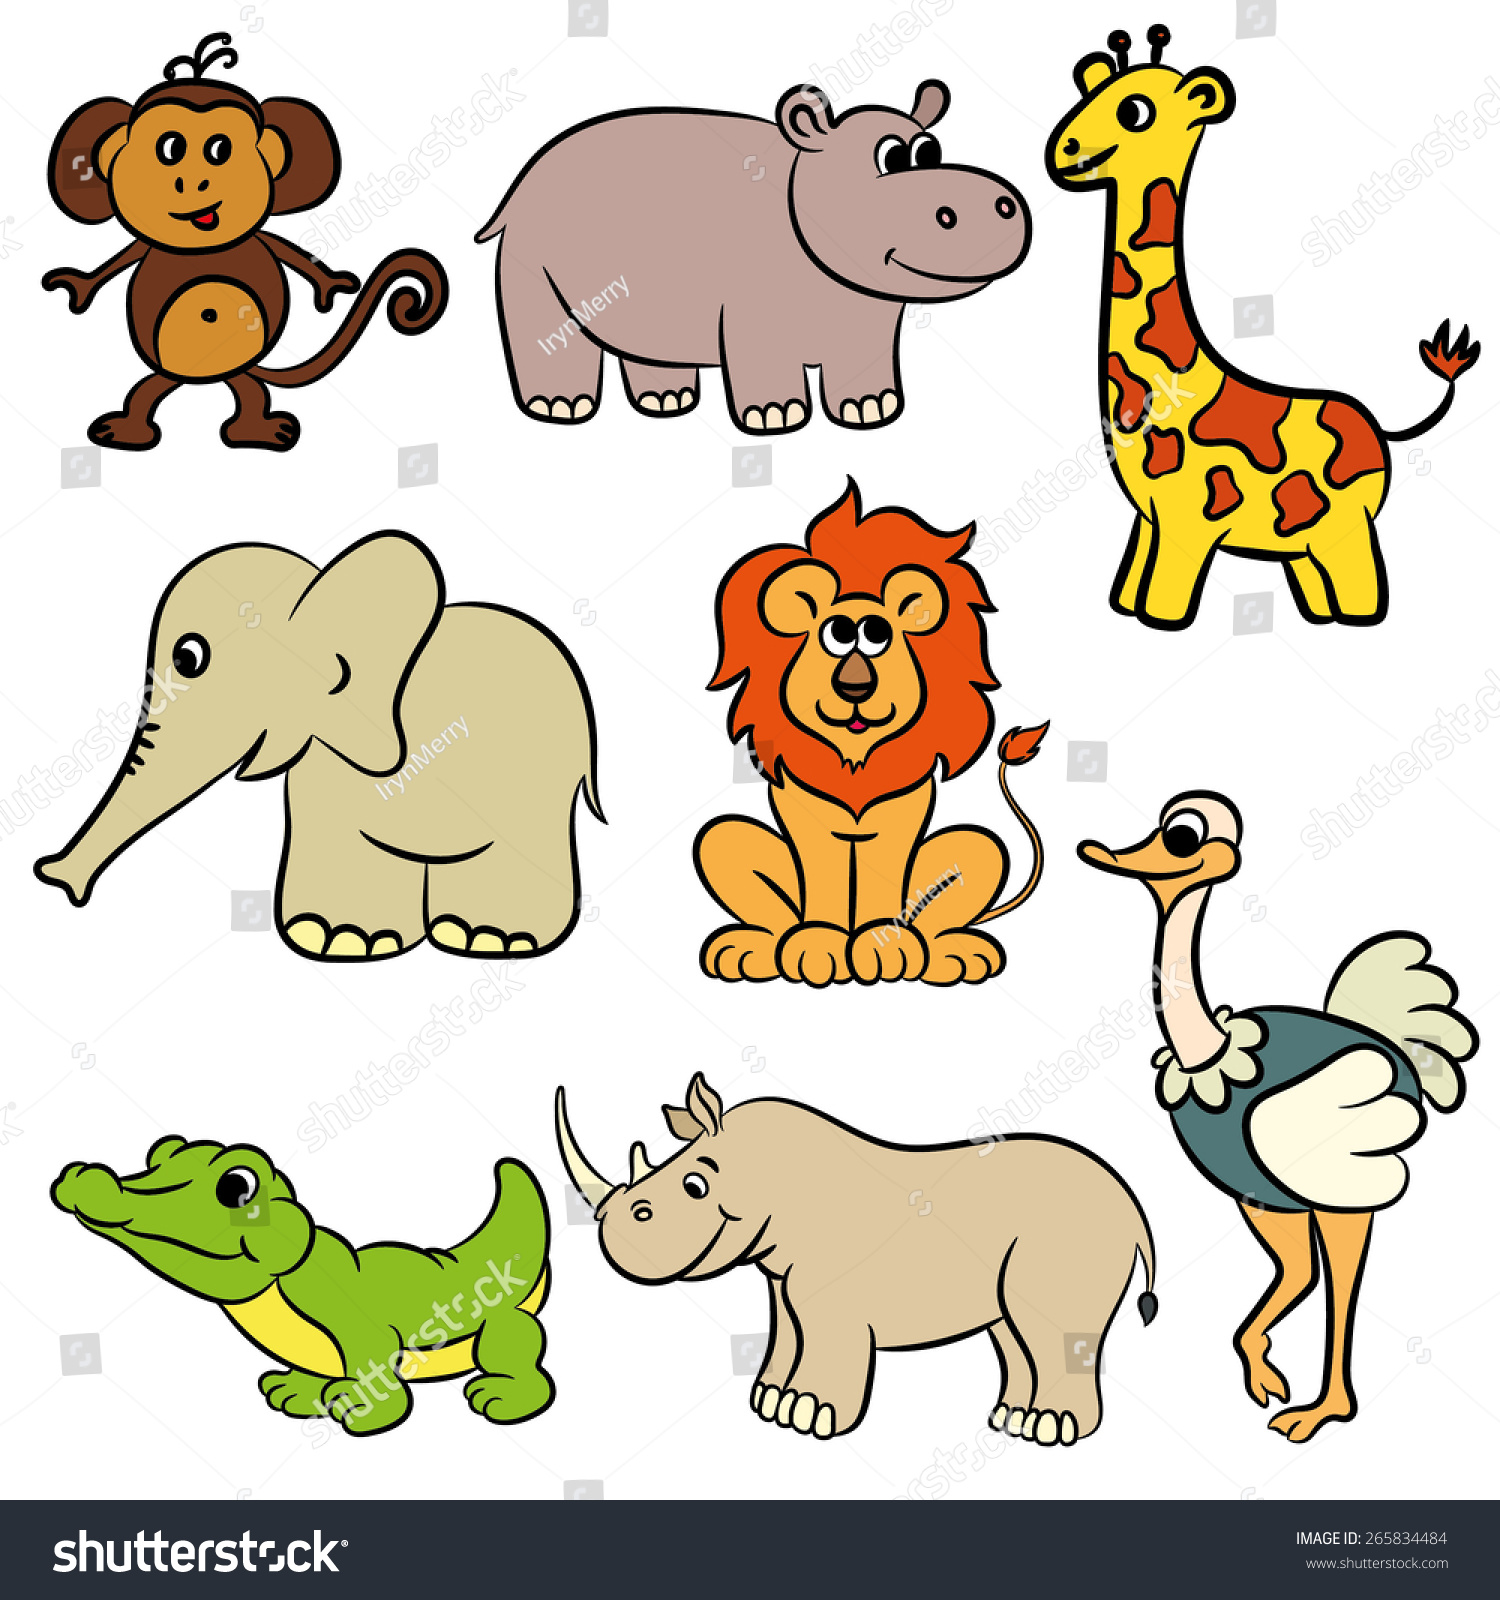 Cute Zoo Animals Collection. Vector Illustration. - 265834484 ...